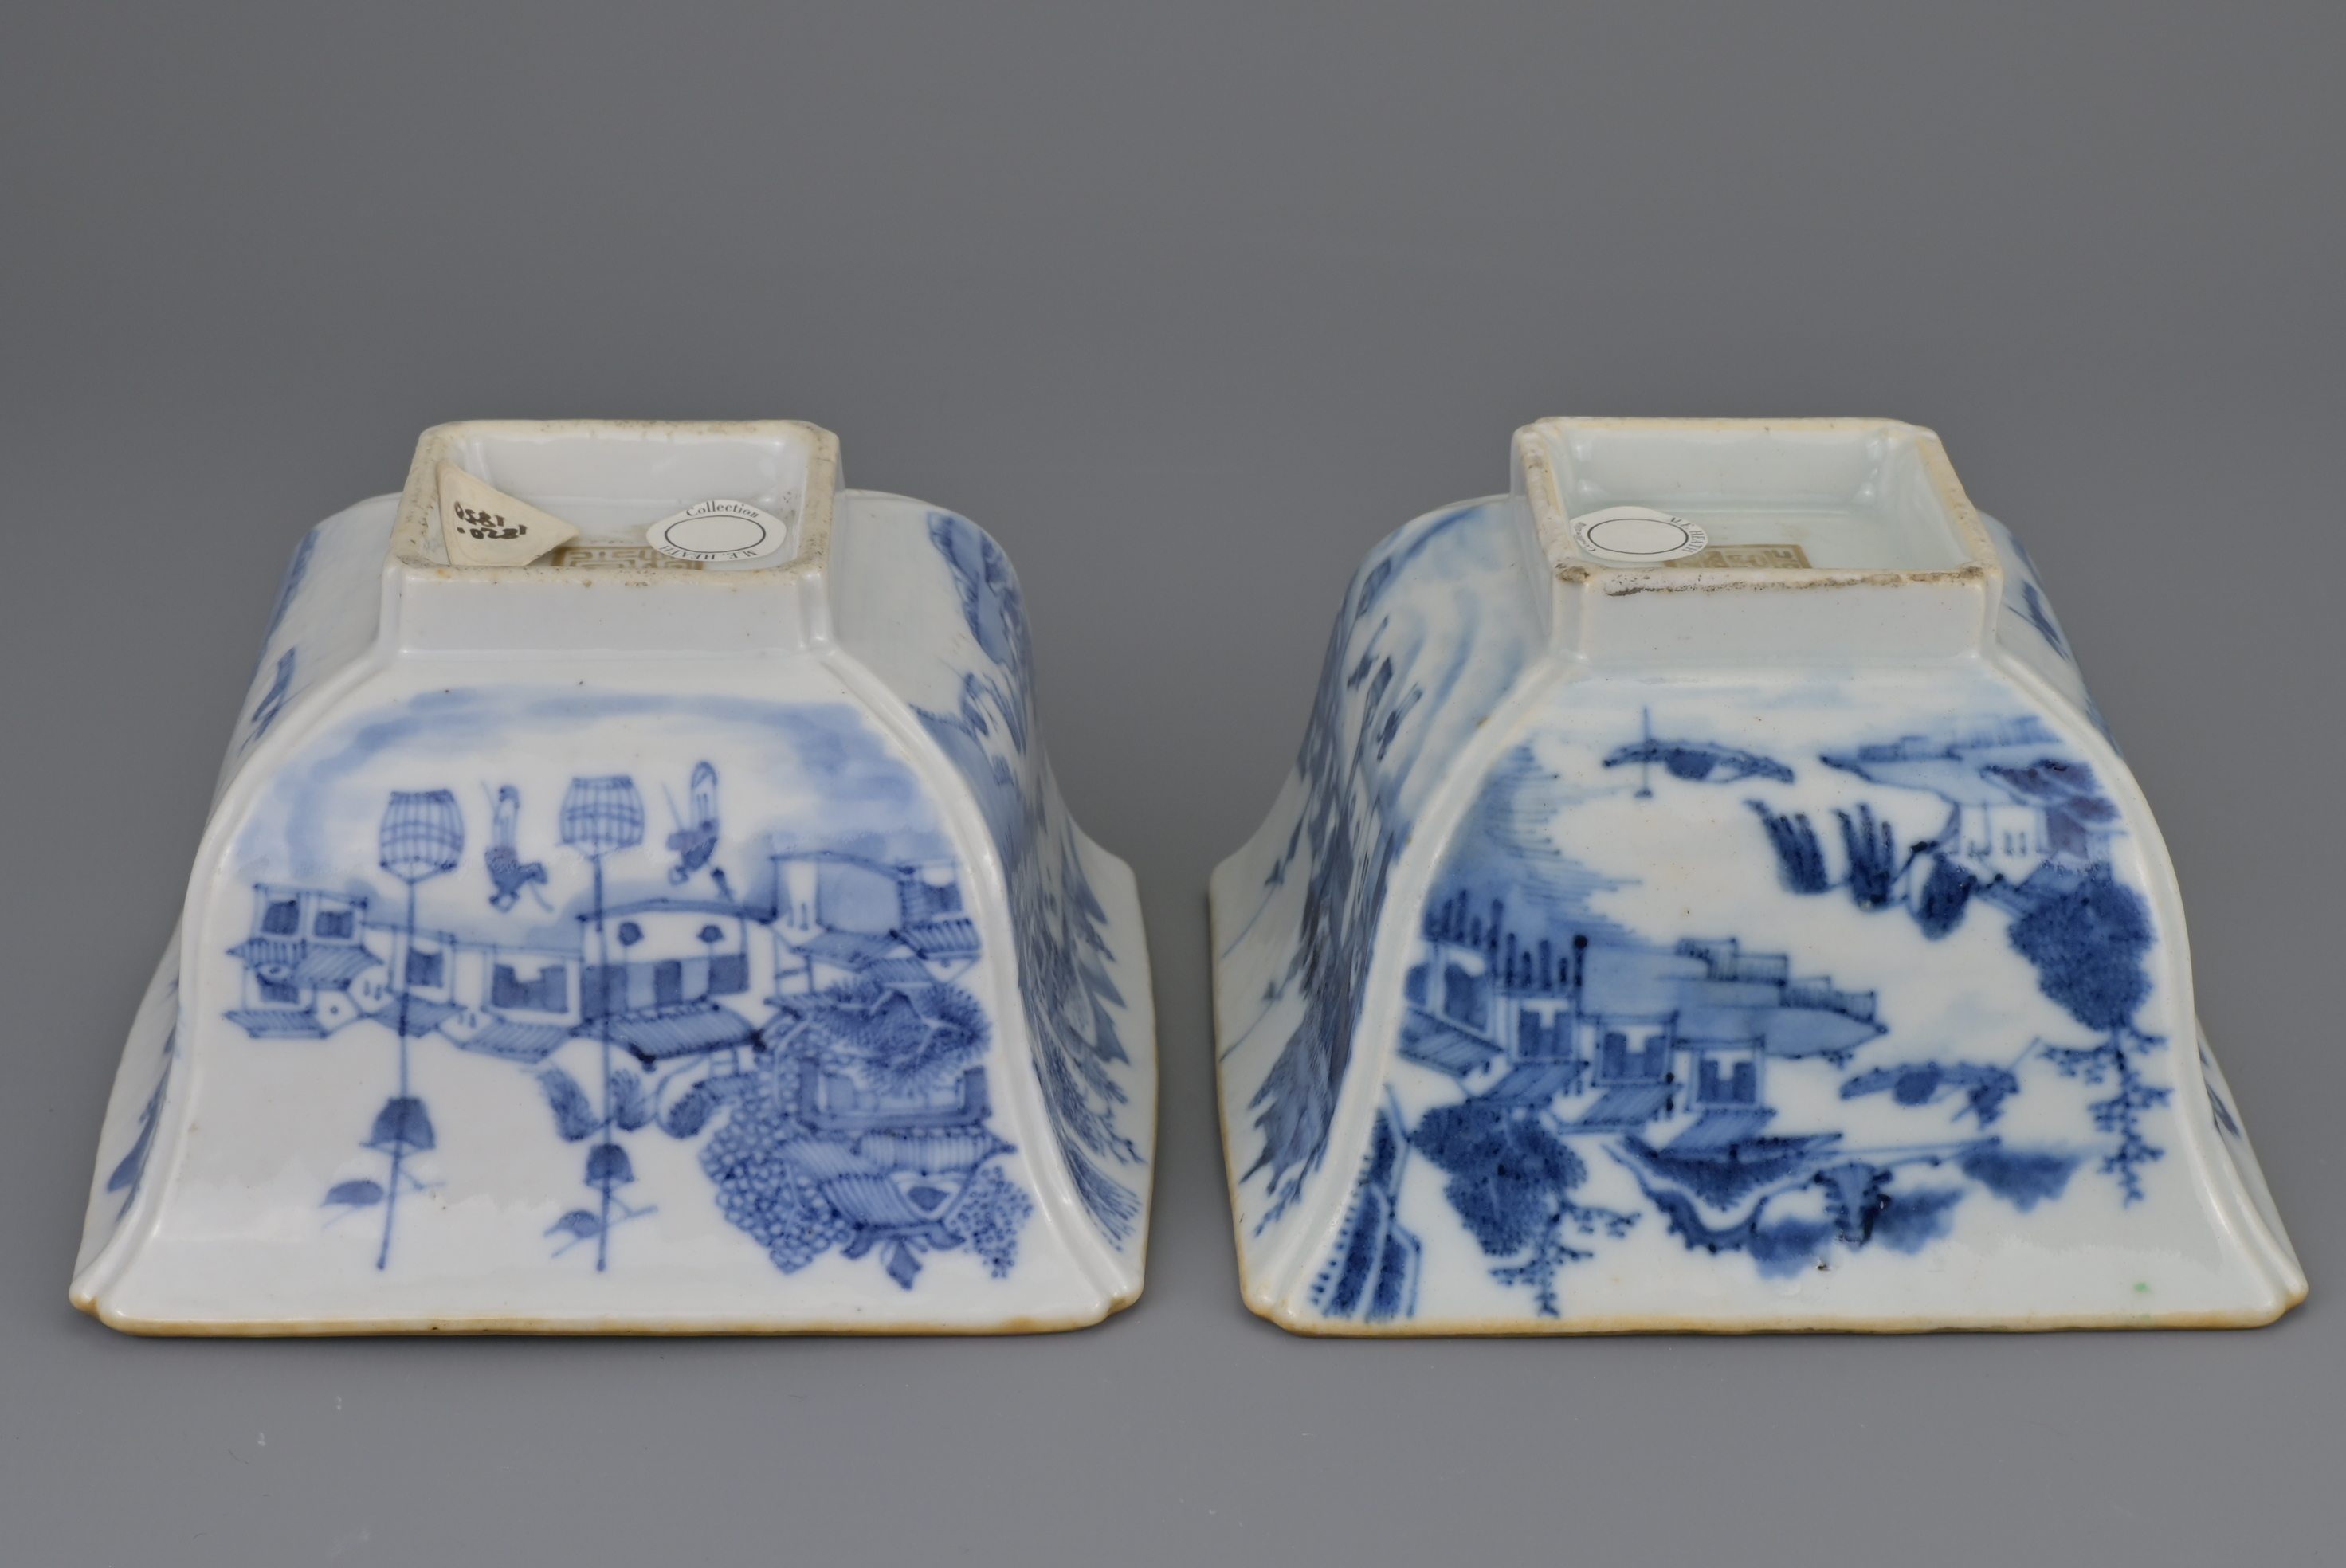 PAIR OF CHINESE BLUE AND WHITE PORCELAIN BOWLS, DAOGUANG MARK AND PERIOD, 19th CENTURY - Image 7 of 9